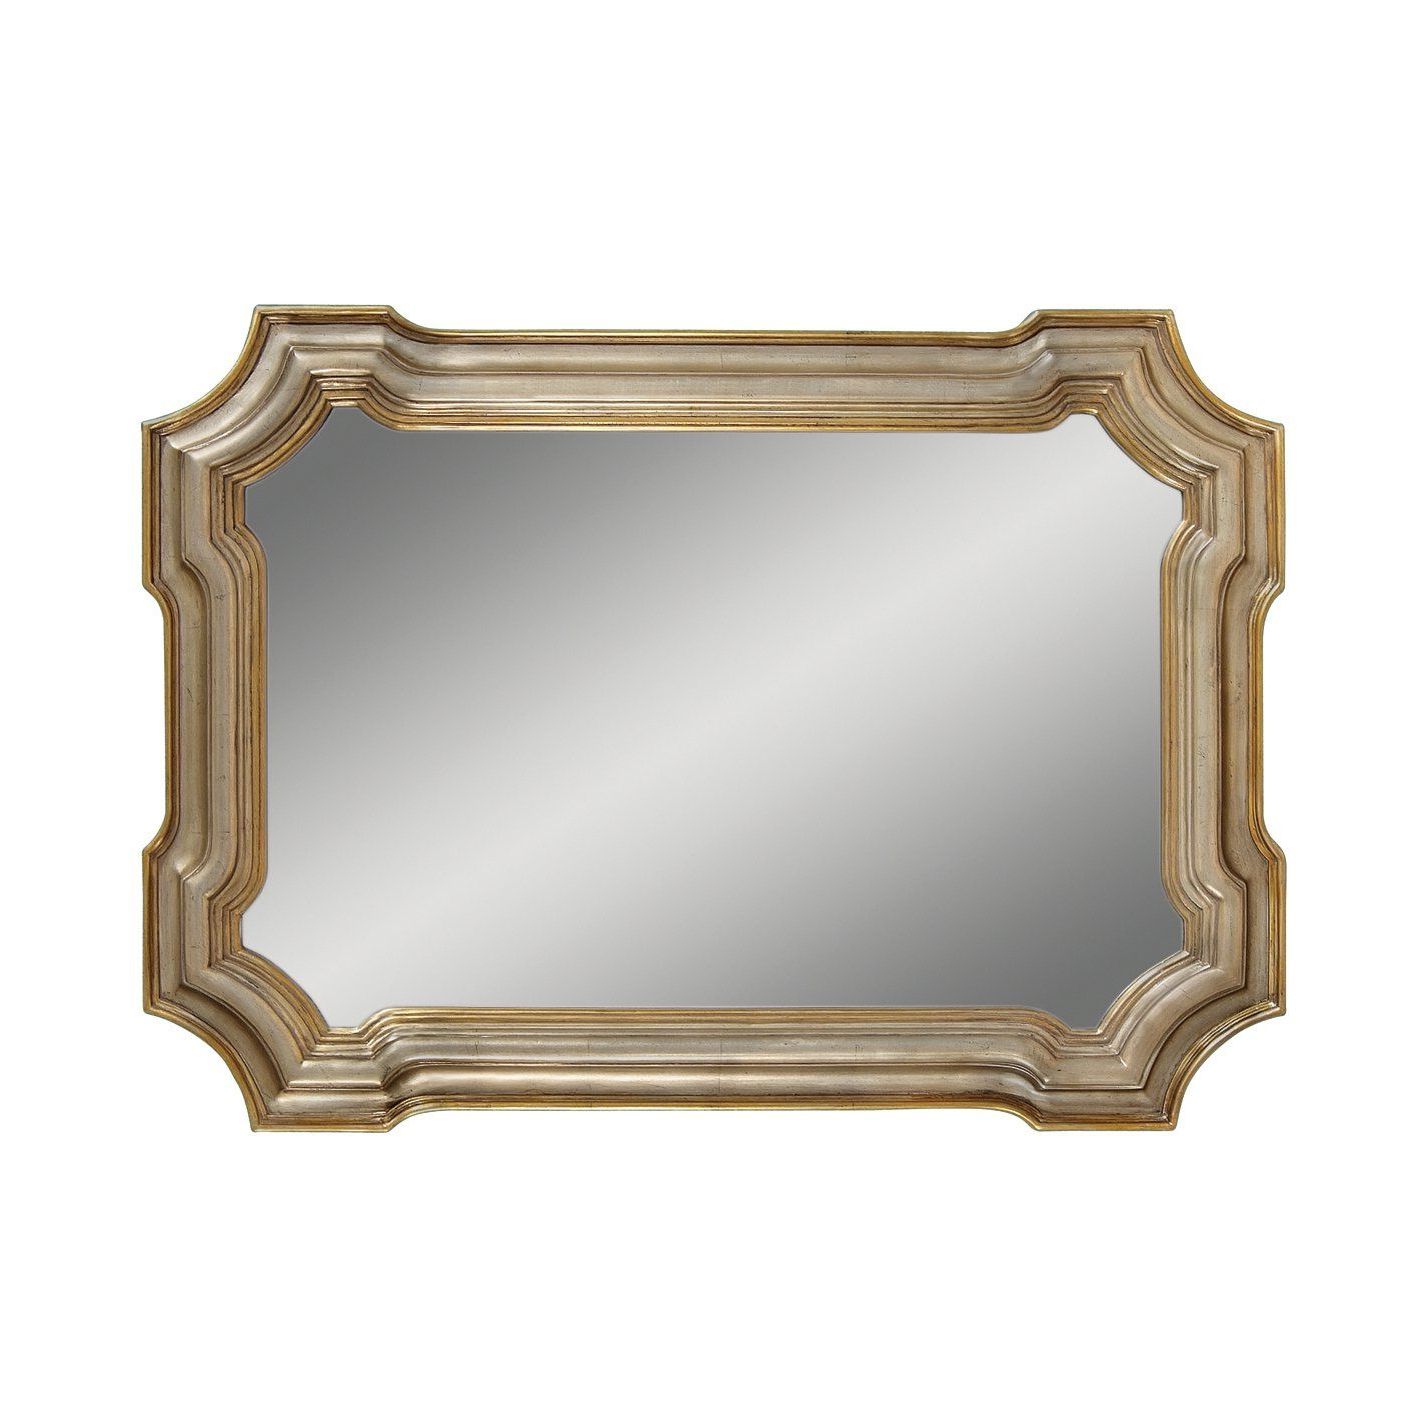 Current Bassett Mirror M2804 Gold Silver Leaf Shaped Rectangle Decorative With Gold Leaf Floor Mirrors (View 2 of 15)